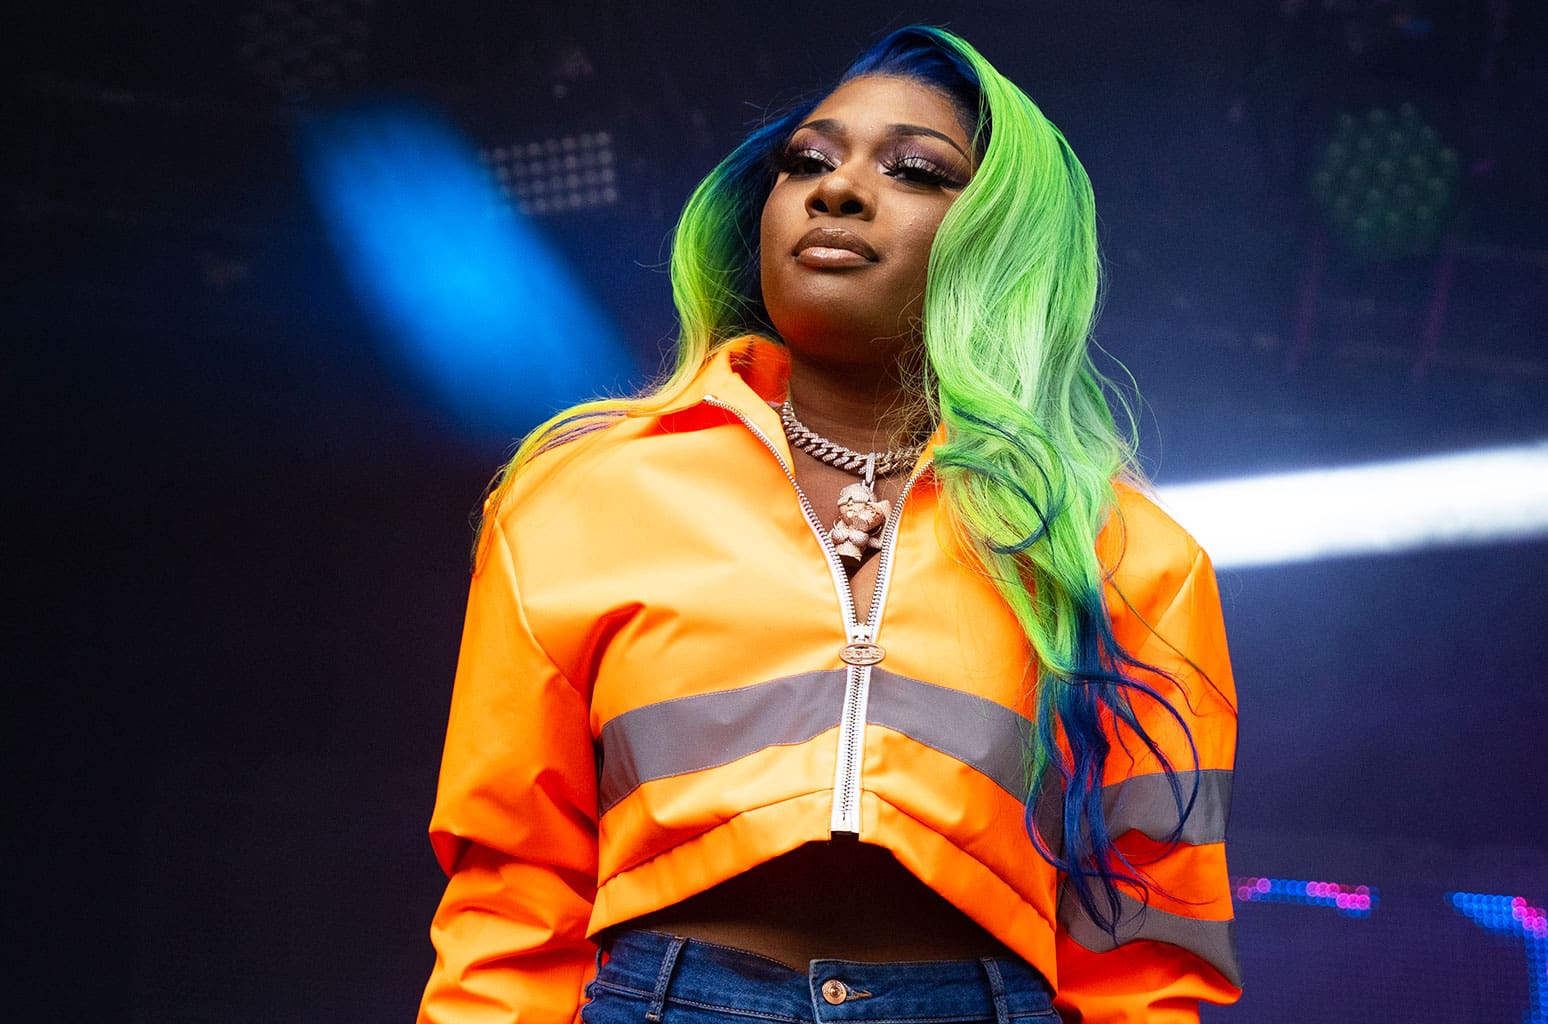 Megan Thee Stallion Reveals She Joined RocNation